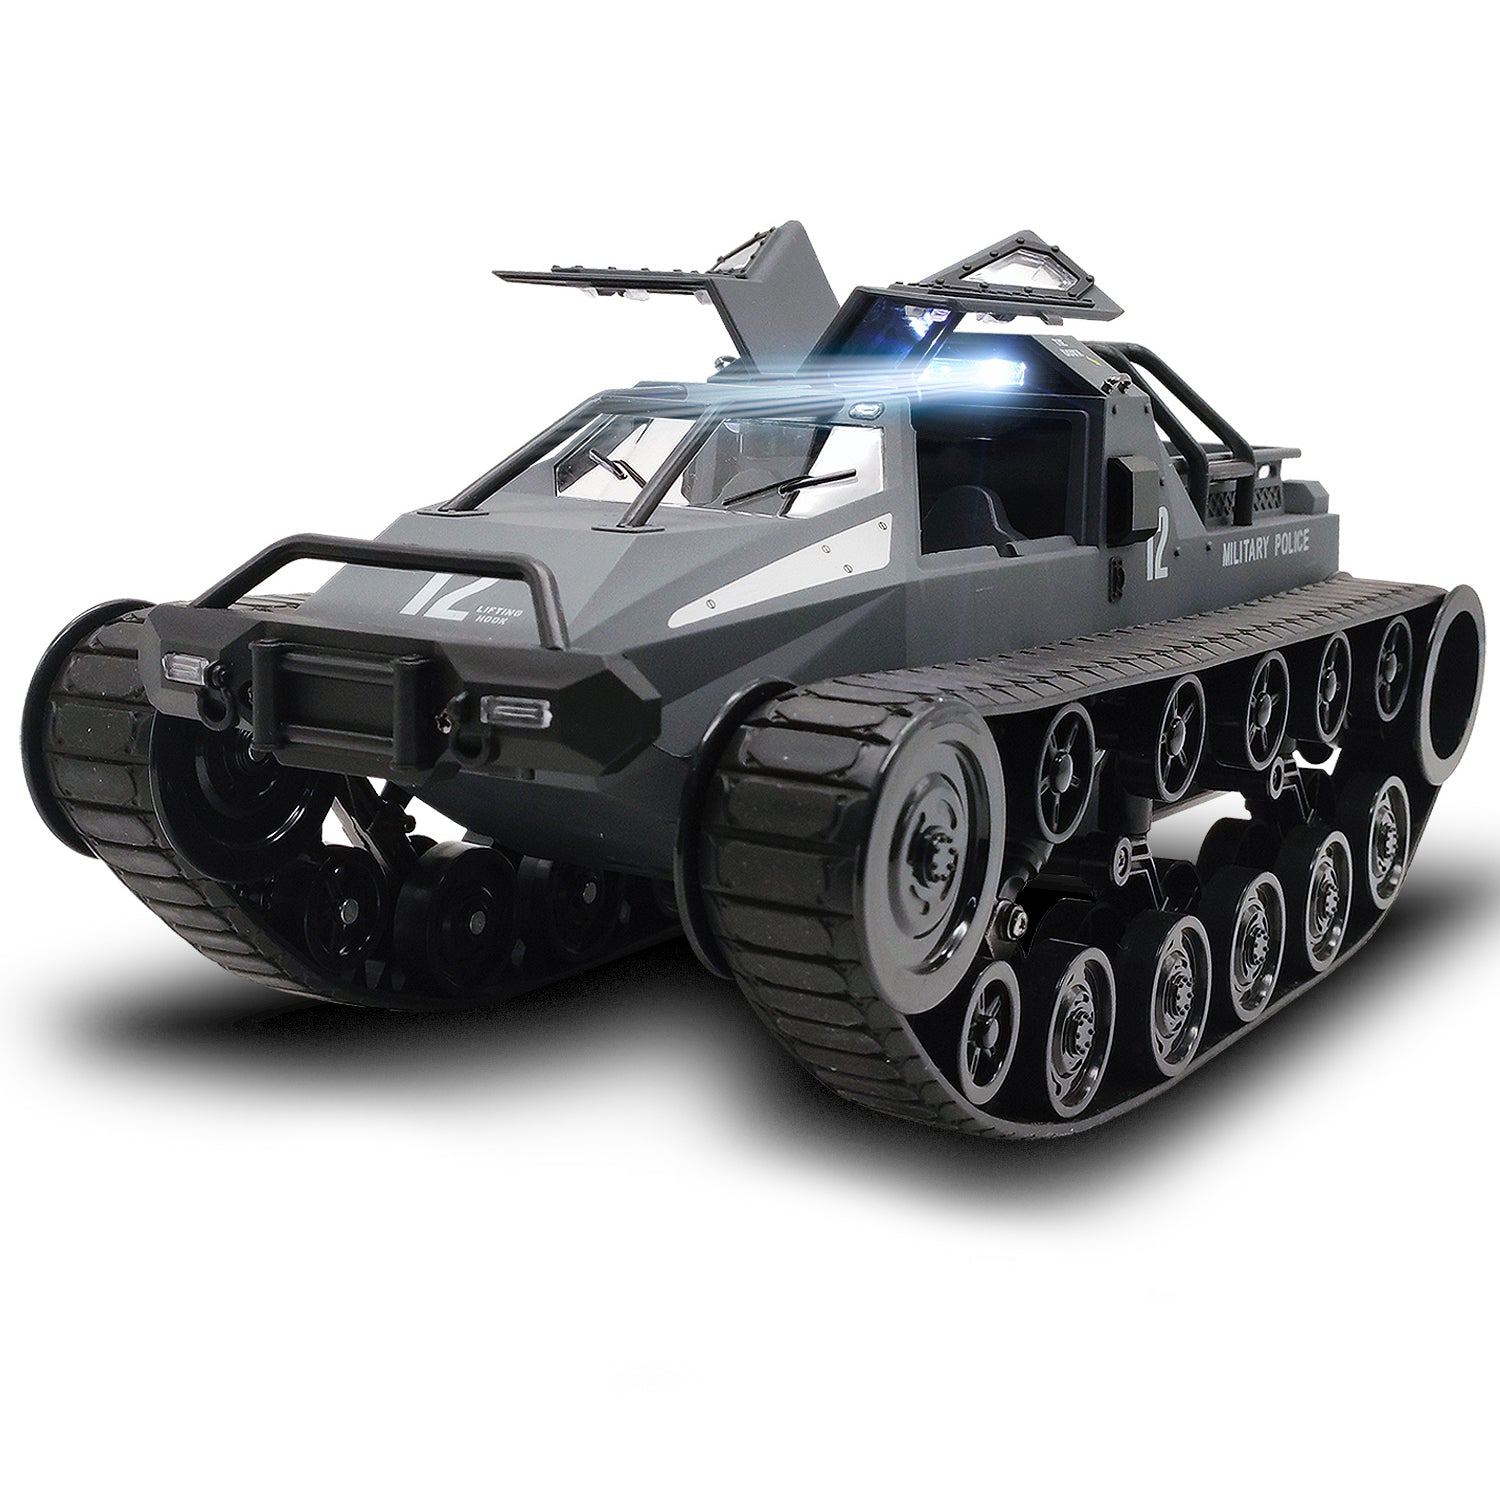 Racent RC Tank 1:12 Scale High Speed Remote Control All Terrain Tank (Grey)